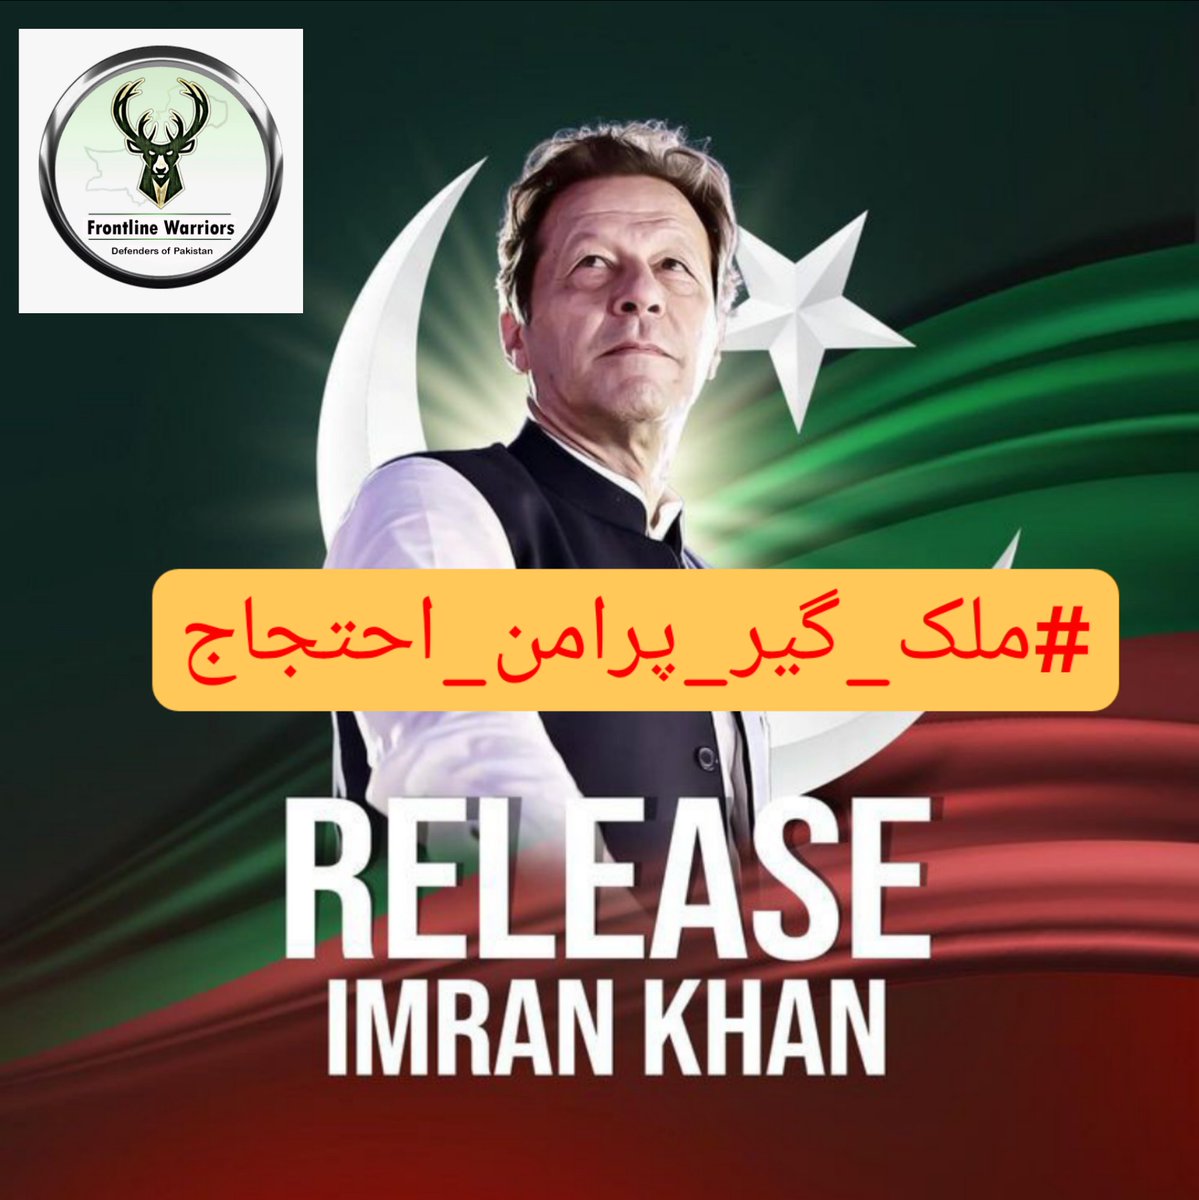 I @izzah__9 confess that Imran Khan has been unjustly imprisoned in a false and fake case. The nation will not silent until Imran Khan is released. @TM__FLW #ملک_گیر_پرامن_احتجاج